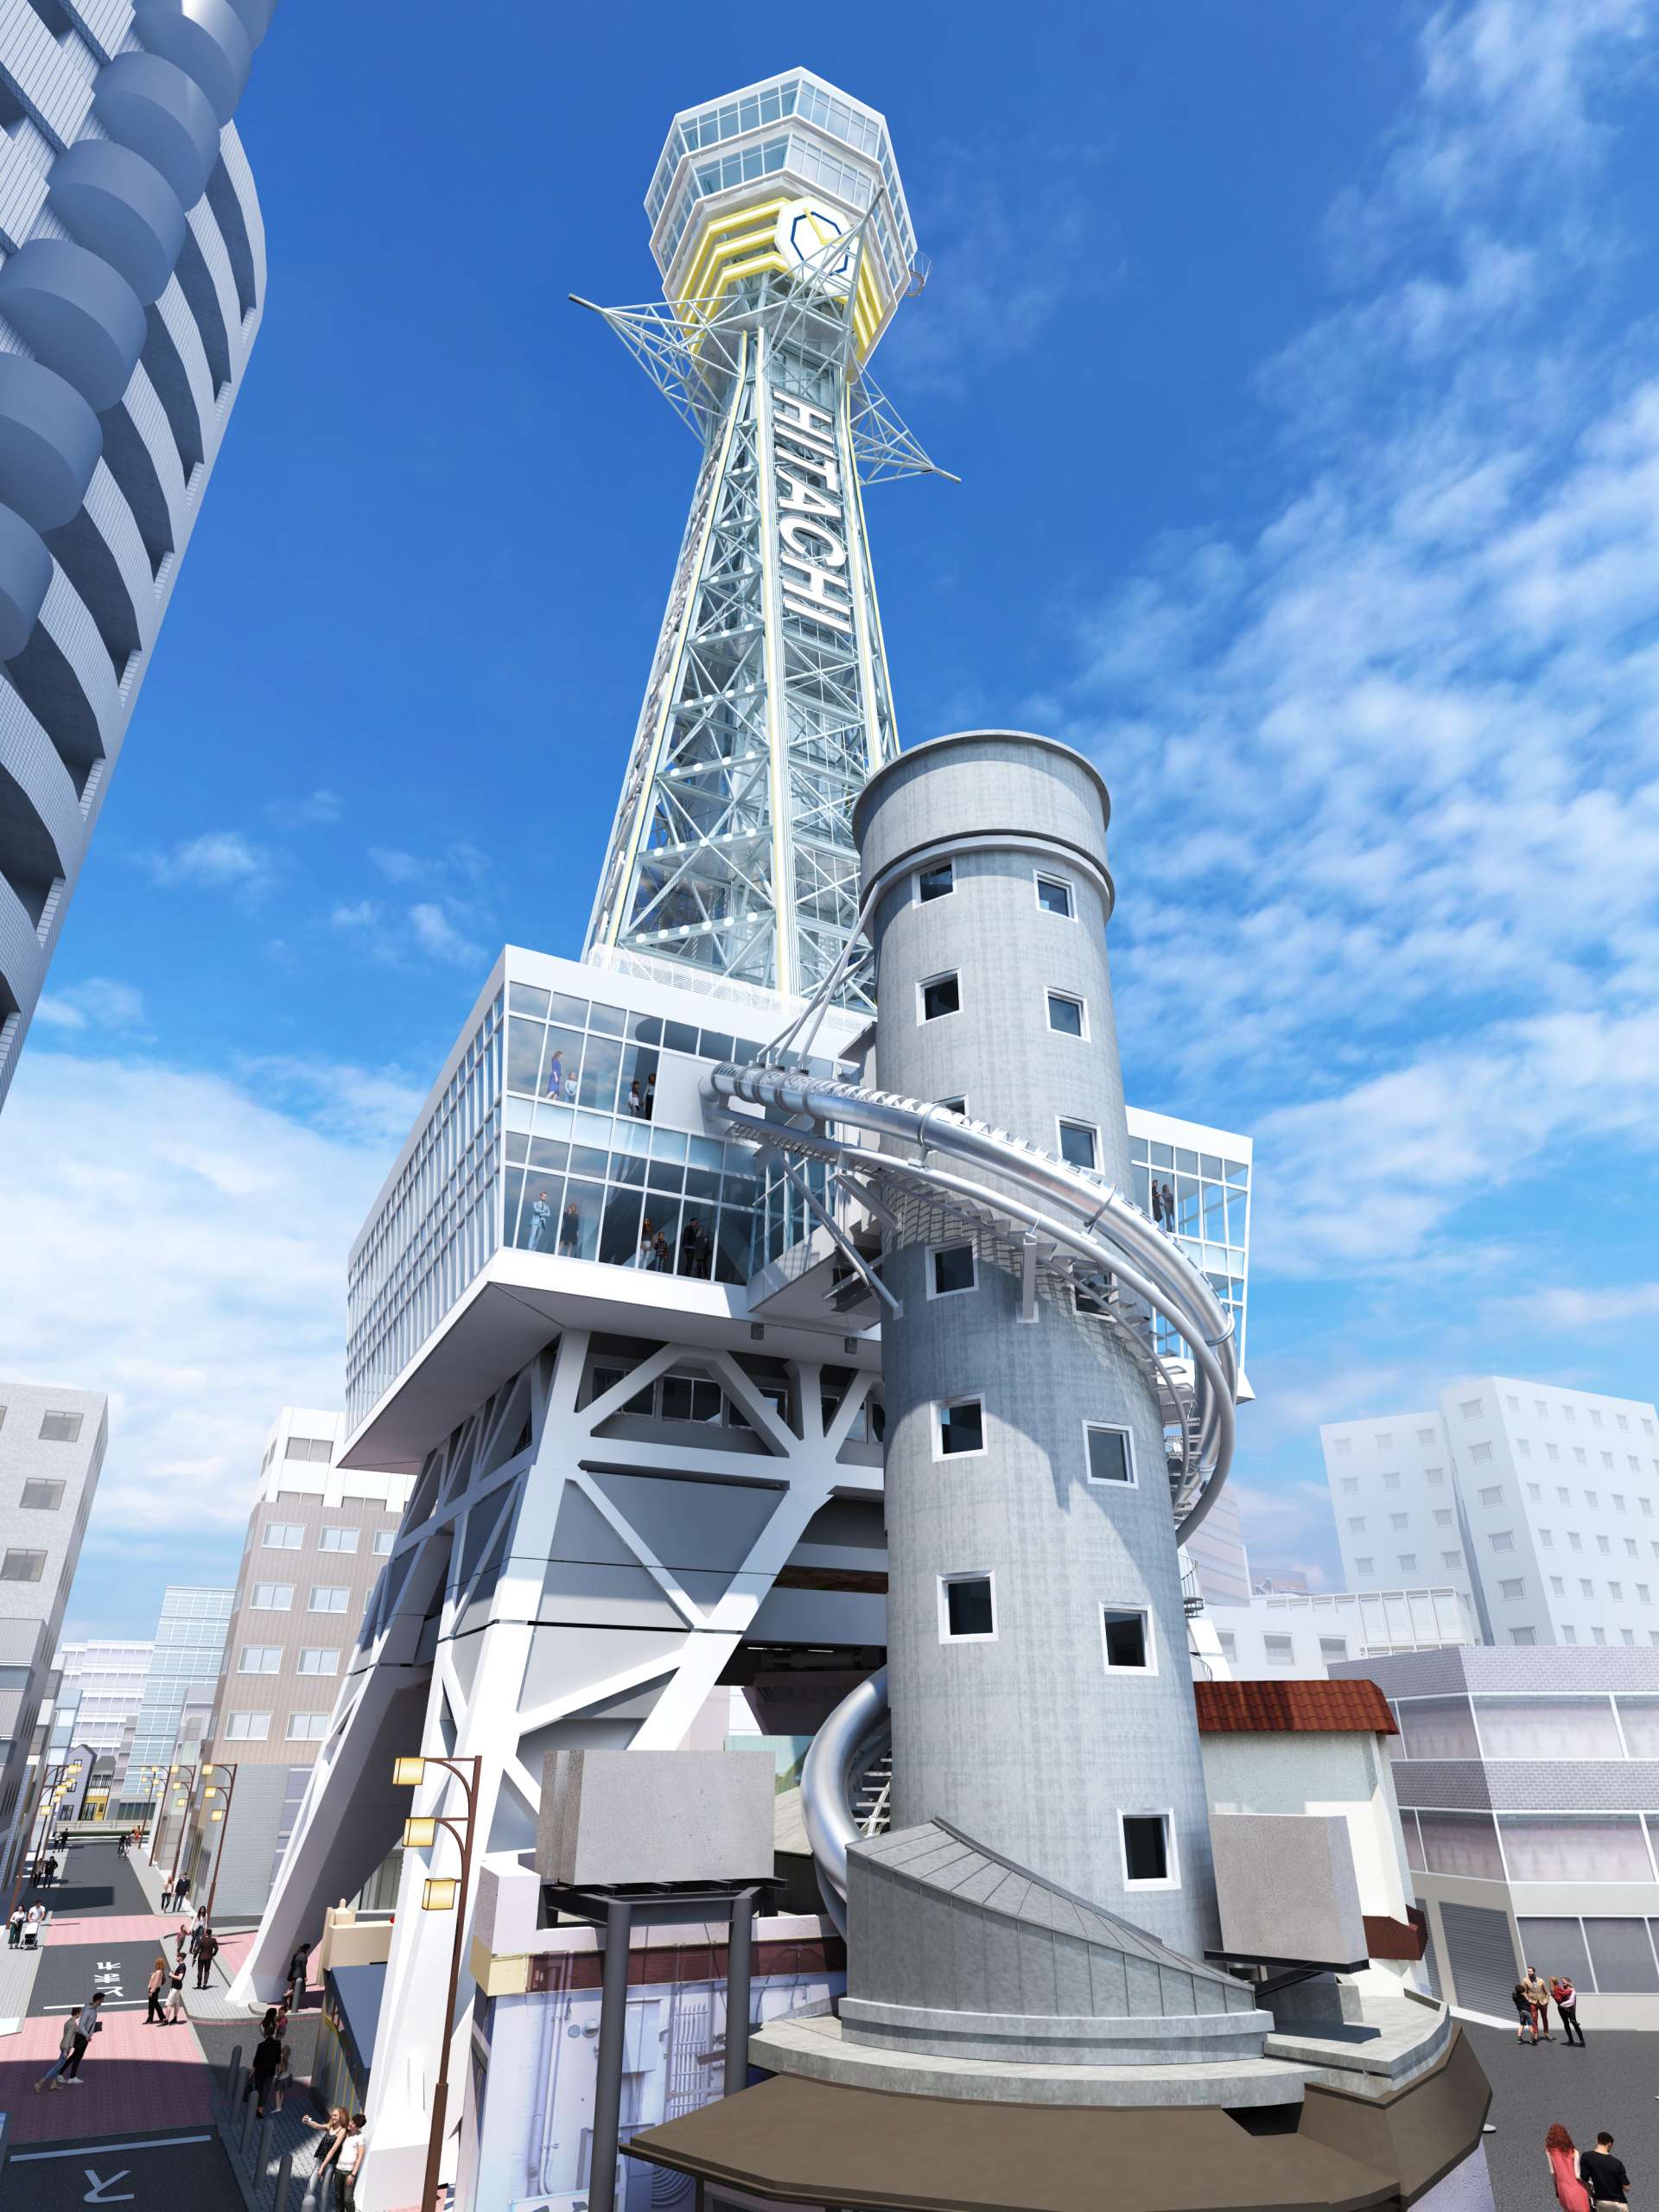 The TOWER SLIDER, sliding down from 22 meters up to the Basement 1st floor (4.5 meters underground) in an instant!